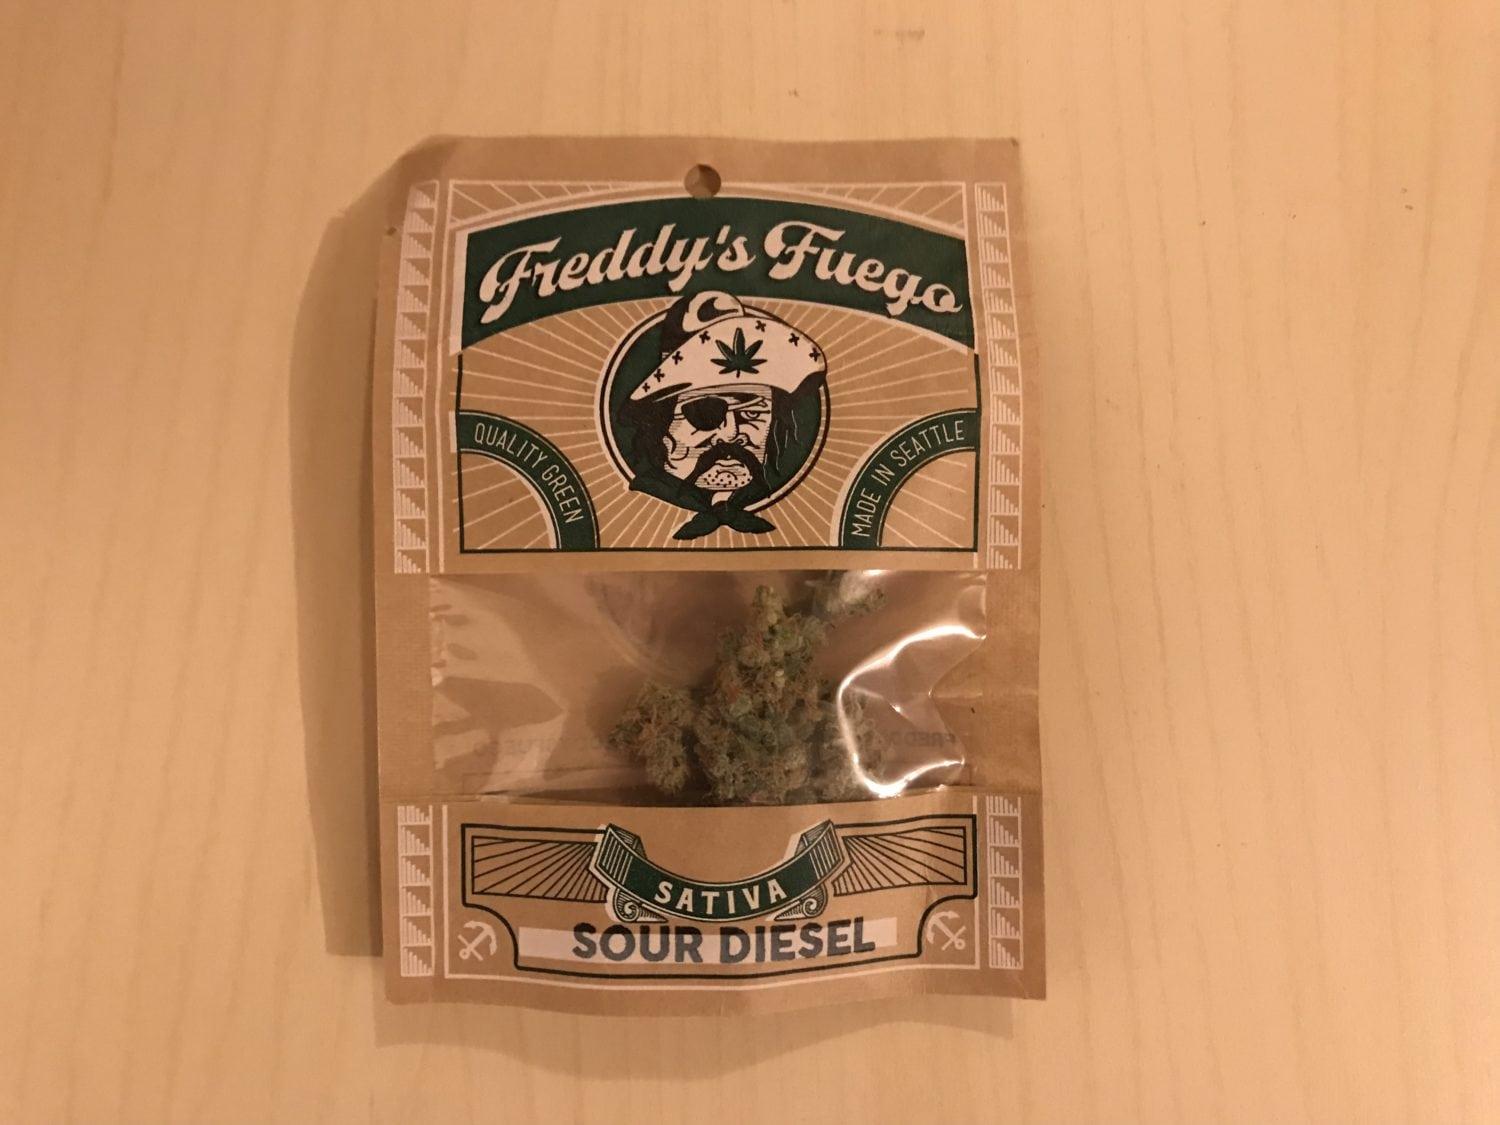 Sour D Logo - Sour Diesel From Freddy's Fuego | Respect My Region